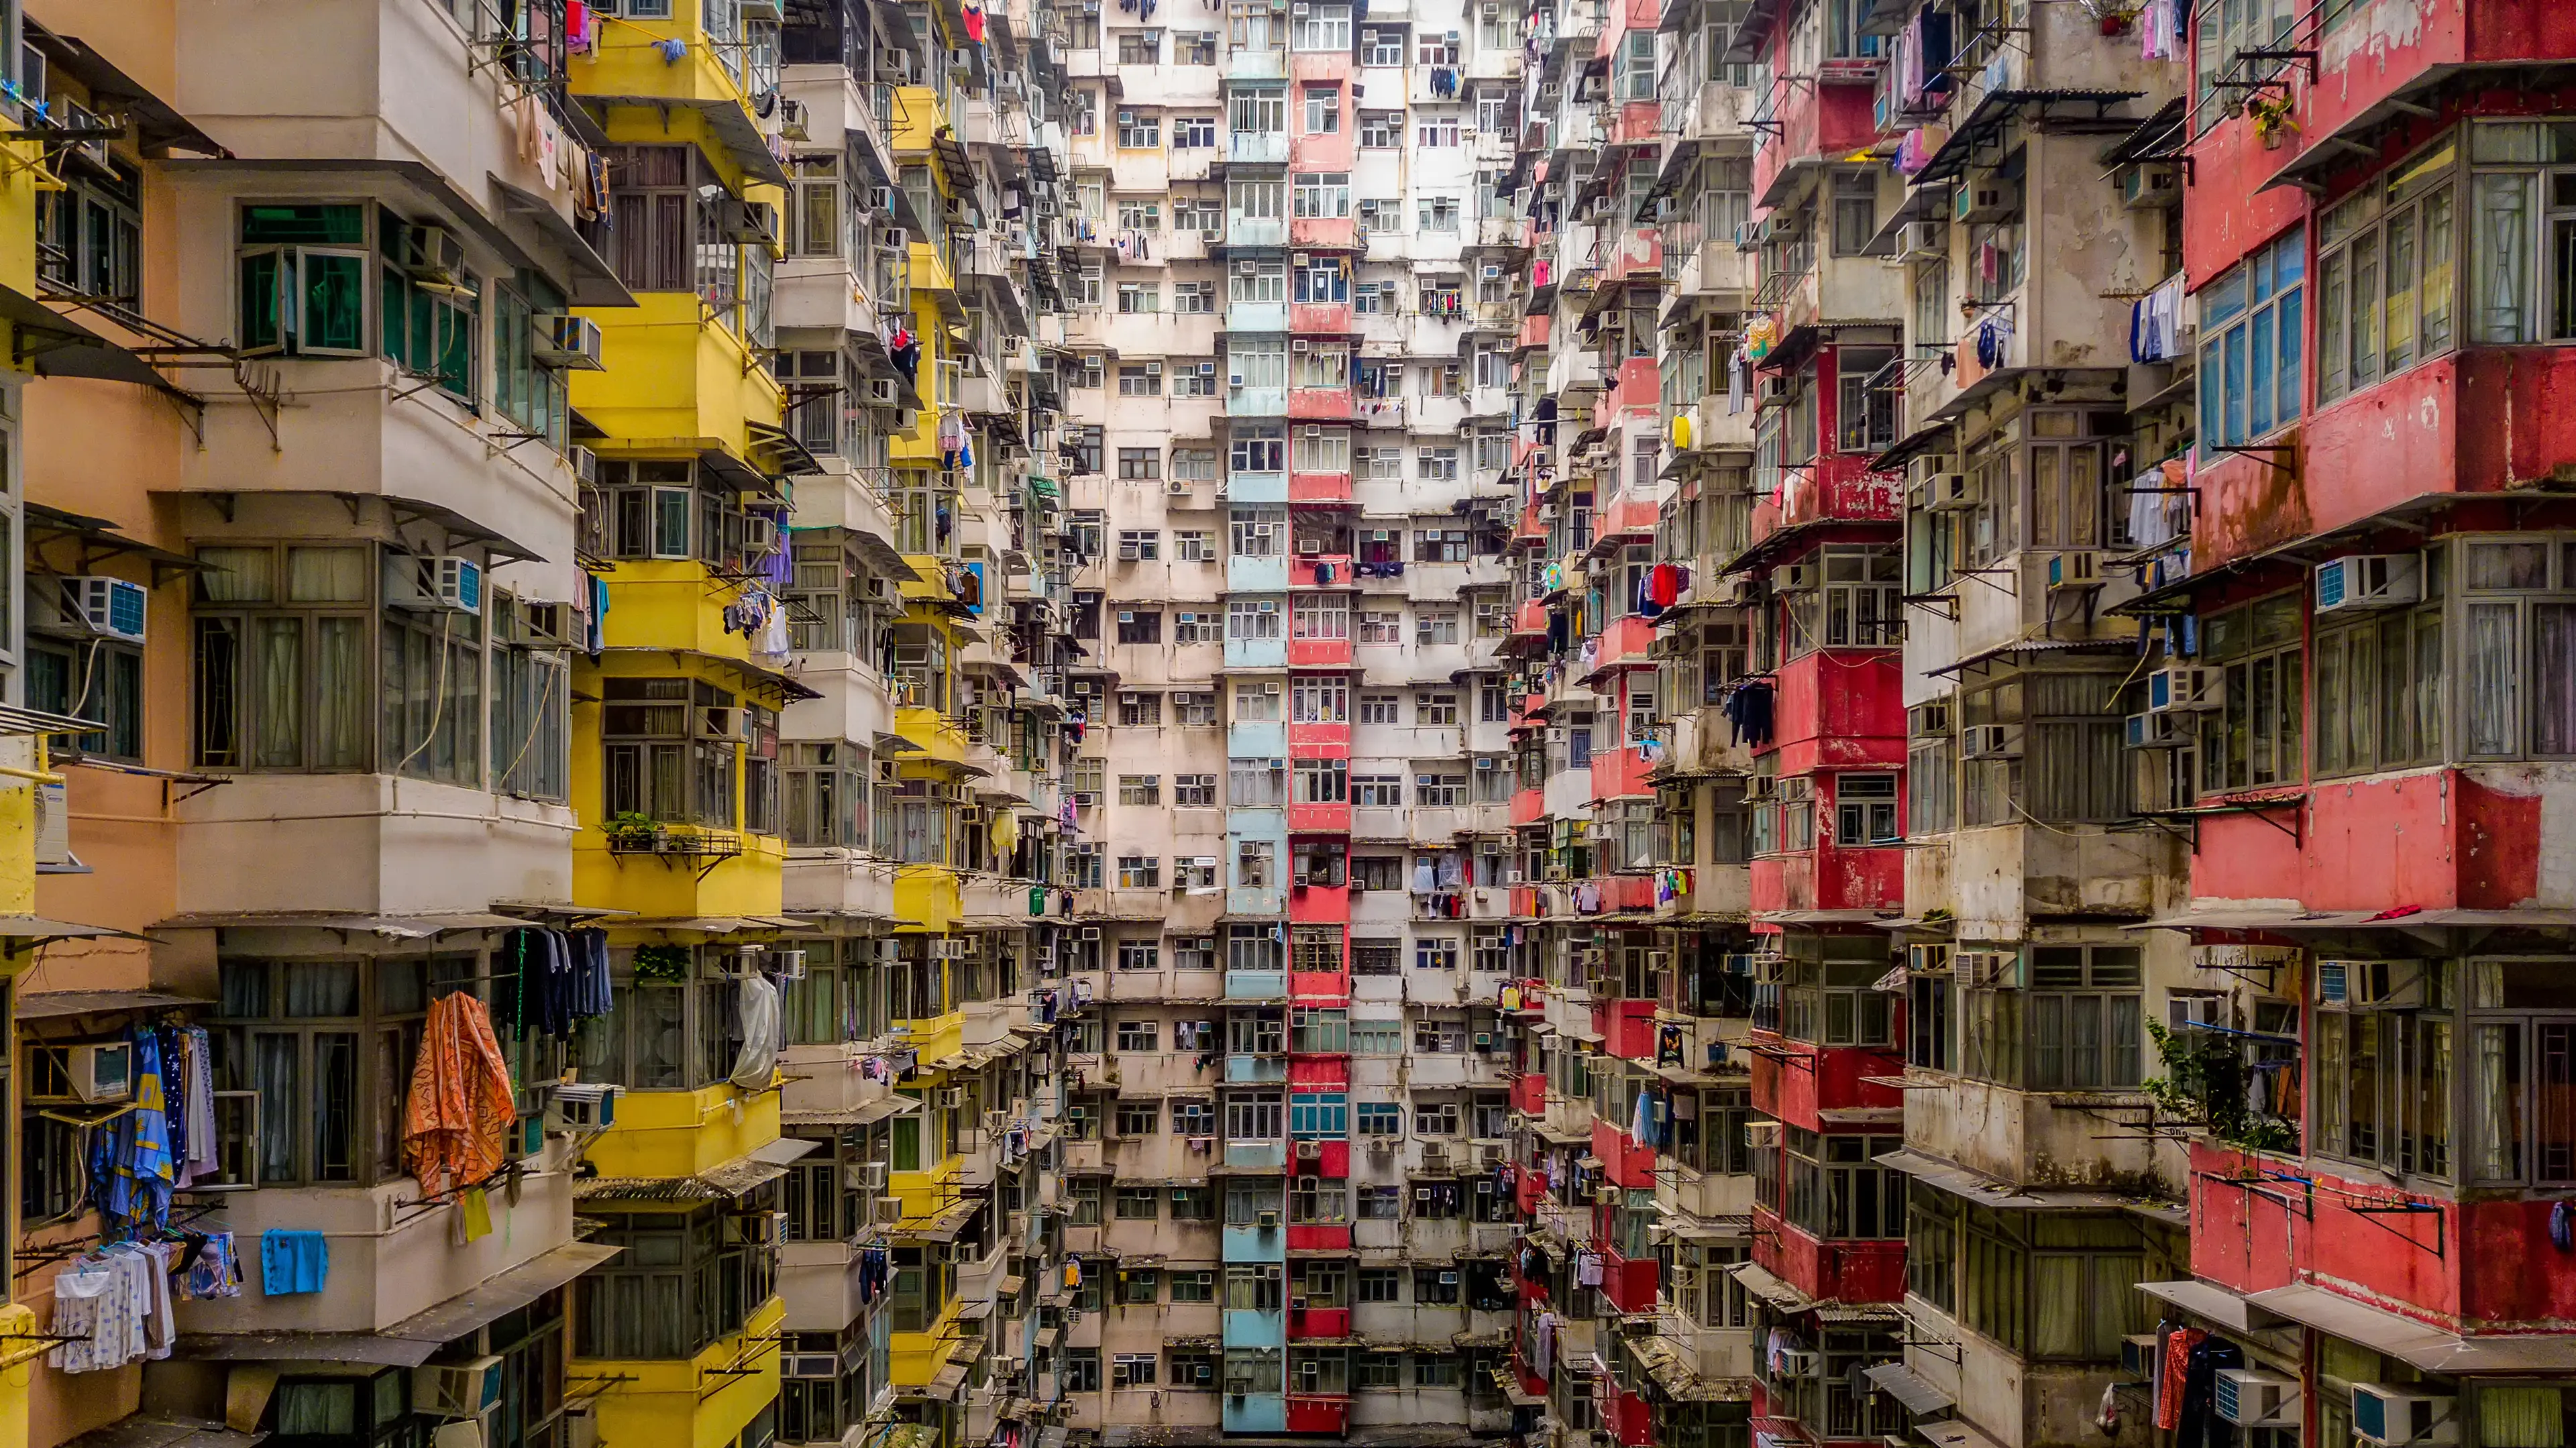 Yick Fat Building, Quarry Bay